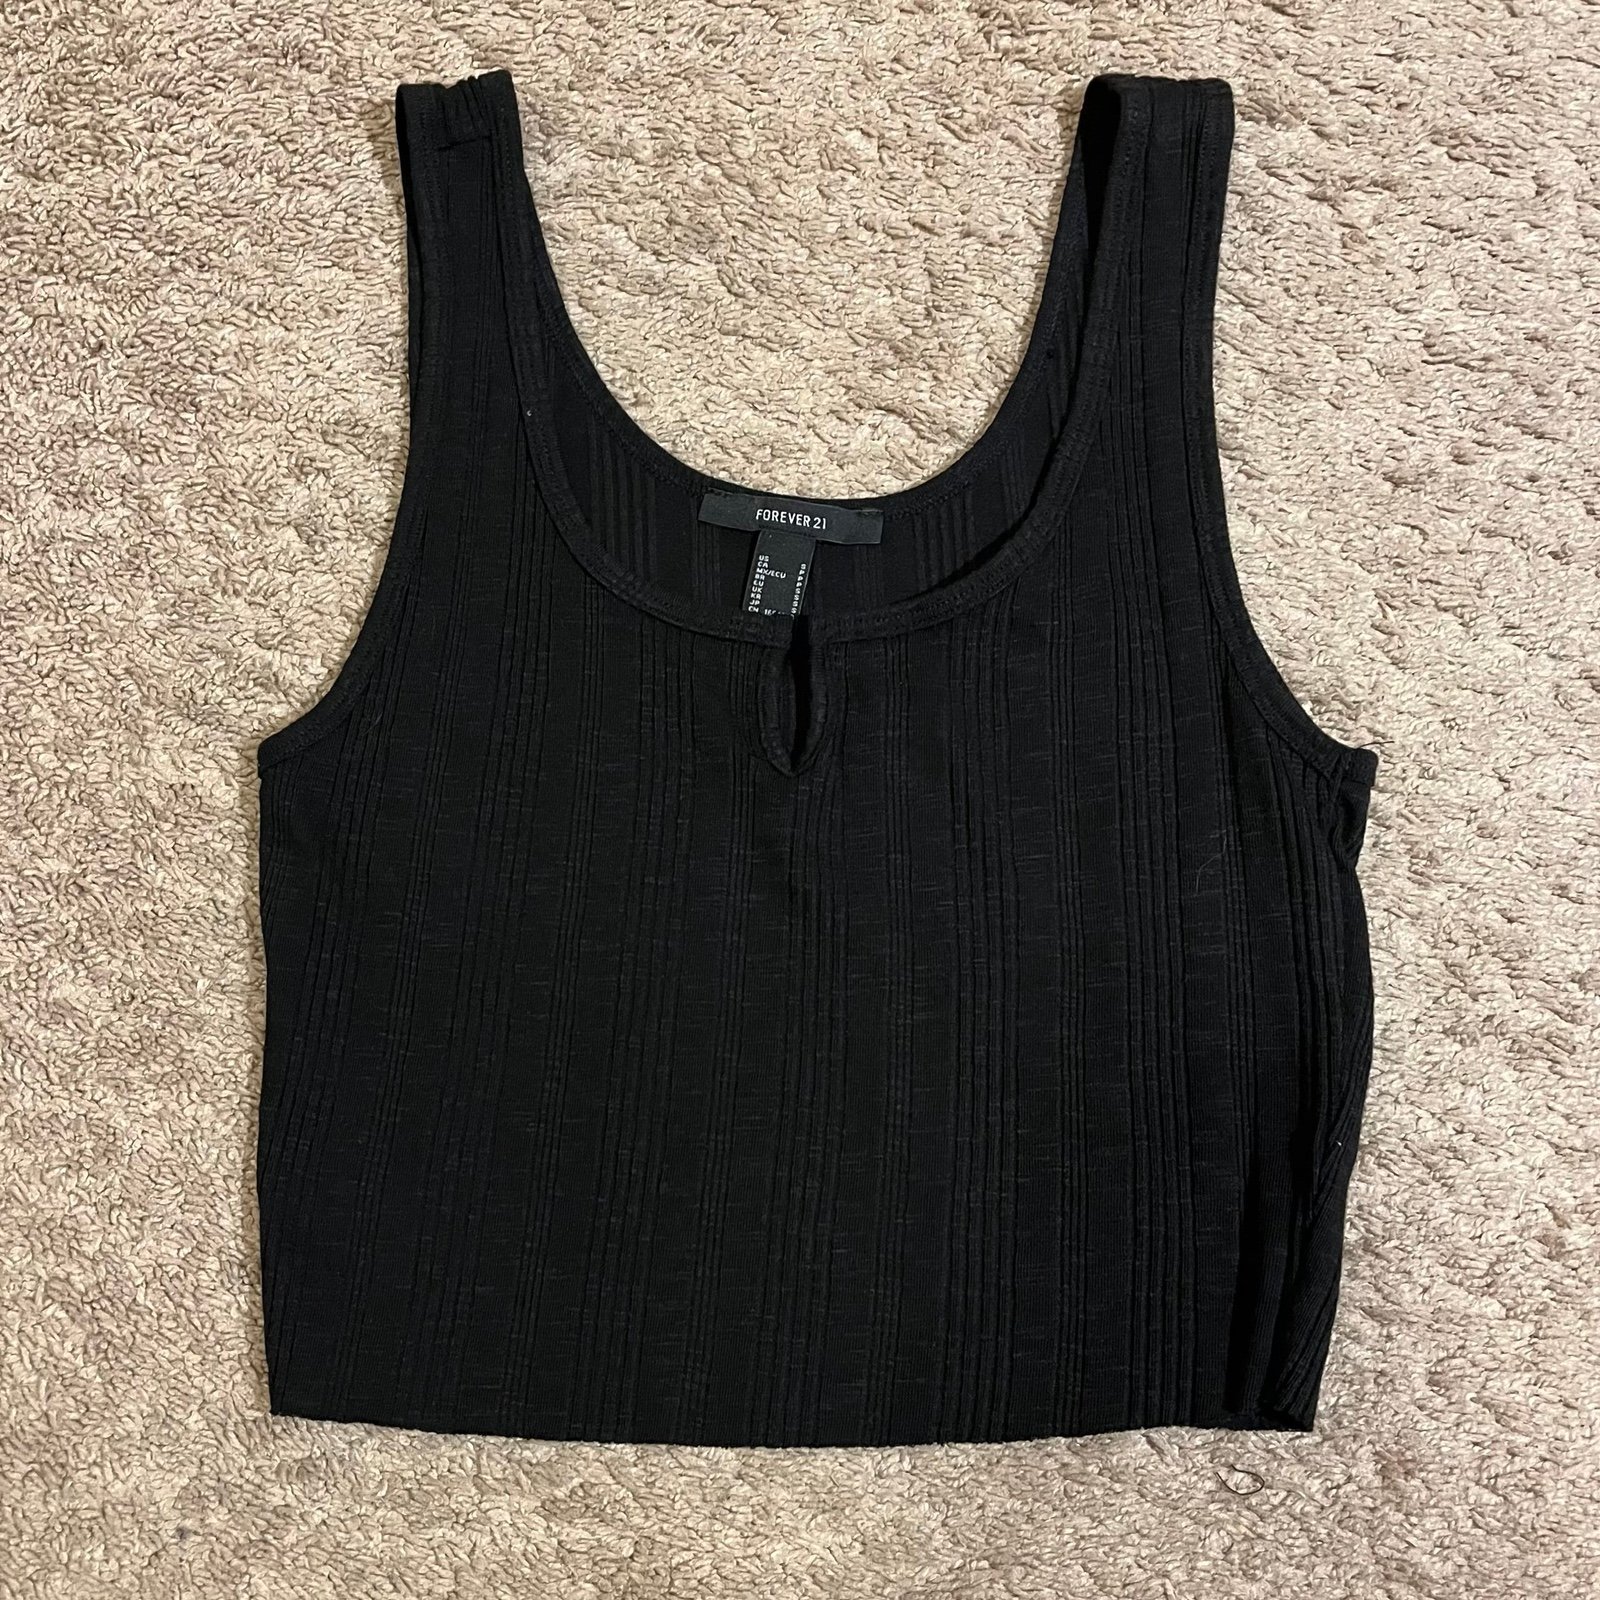 large discount Black Crop Tank Top MkJnNaUsd just for you